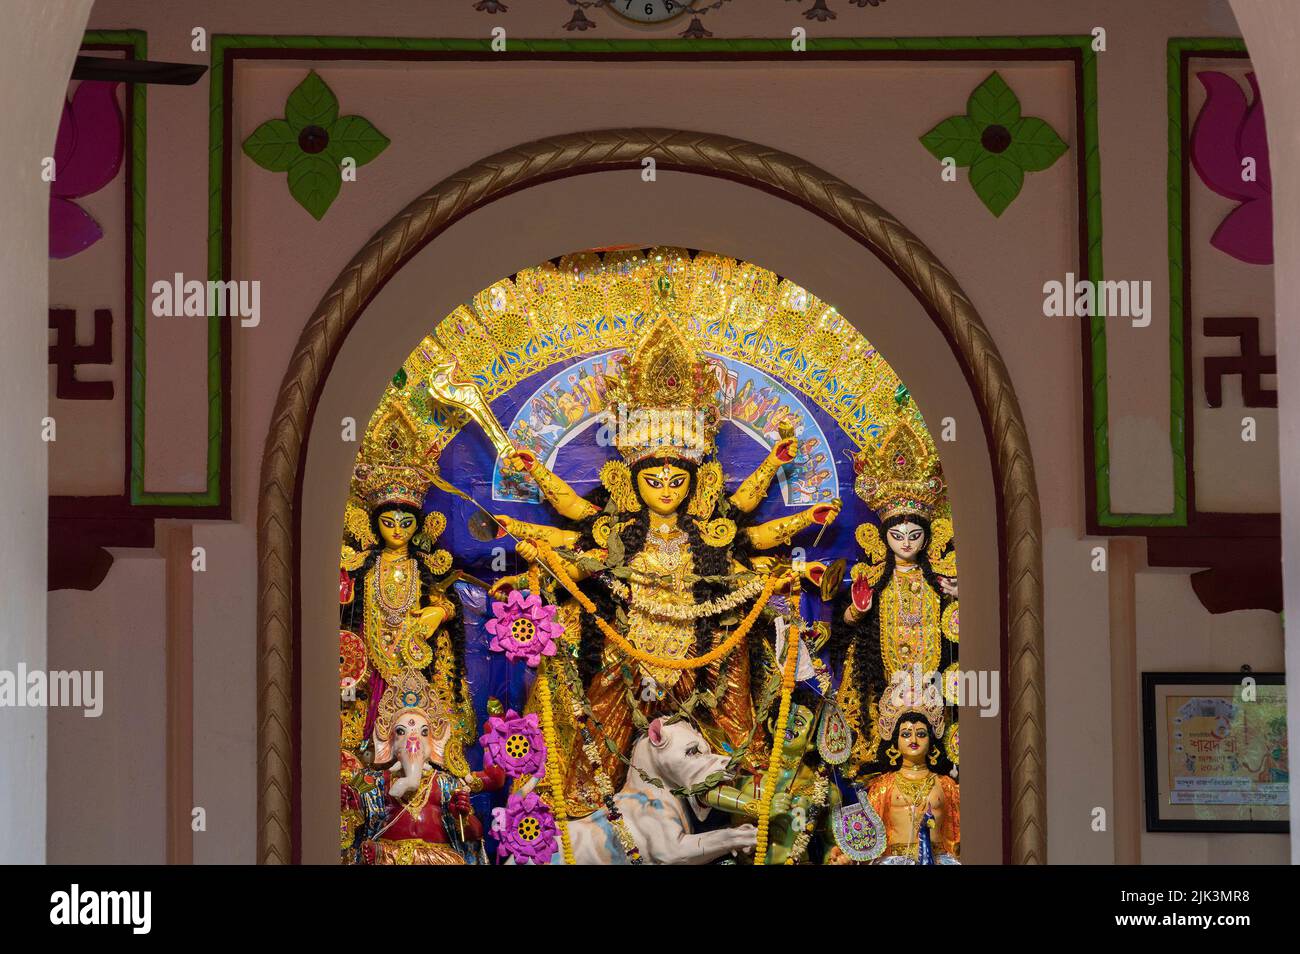 Howrah, India -October 26th, 2020 : Goddess Durga being worshipped inside old age decorated home. Durga Puja, biggest festival of Hinduism. Stock Photo